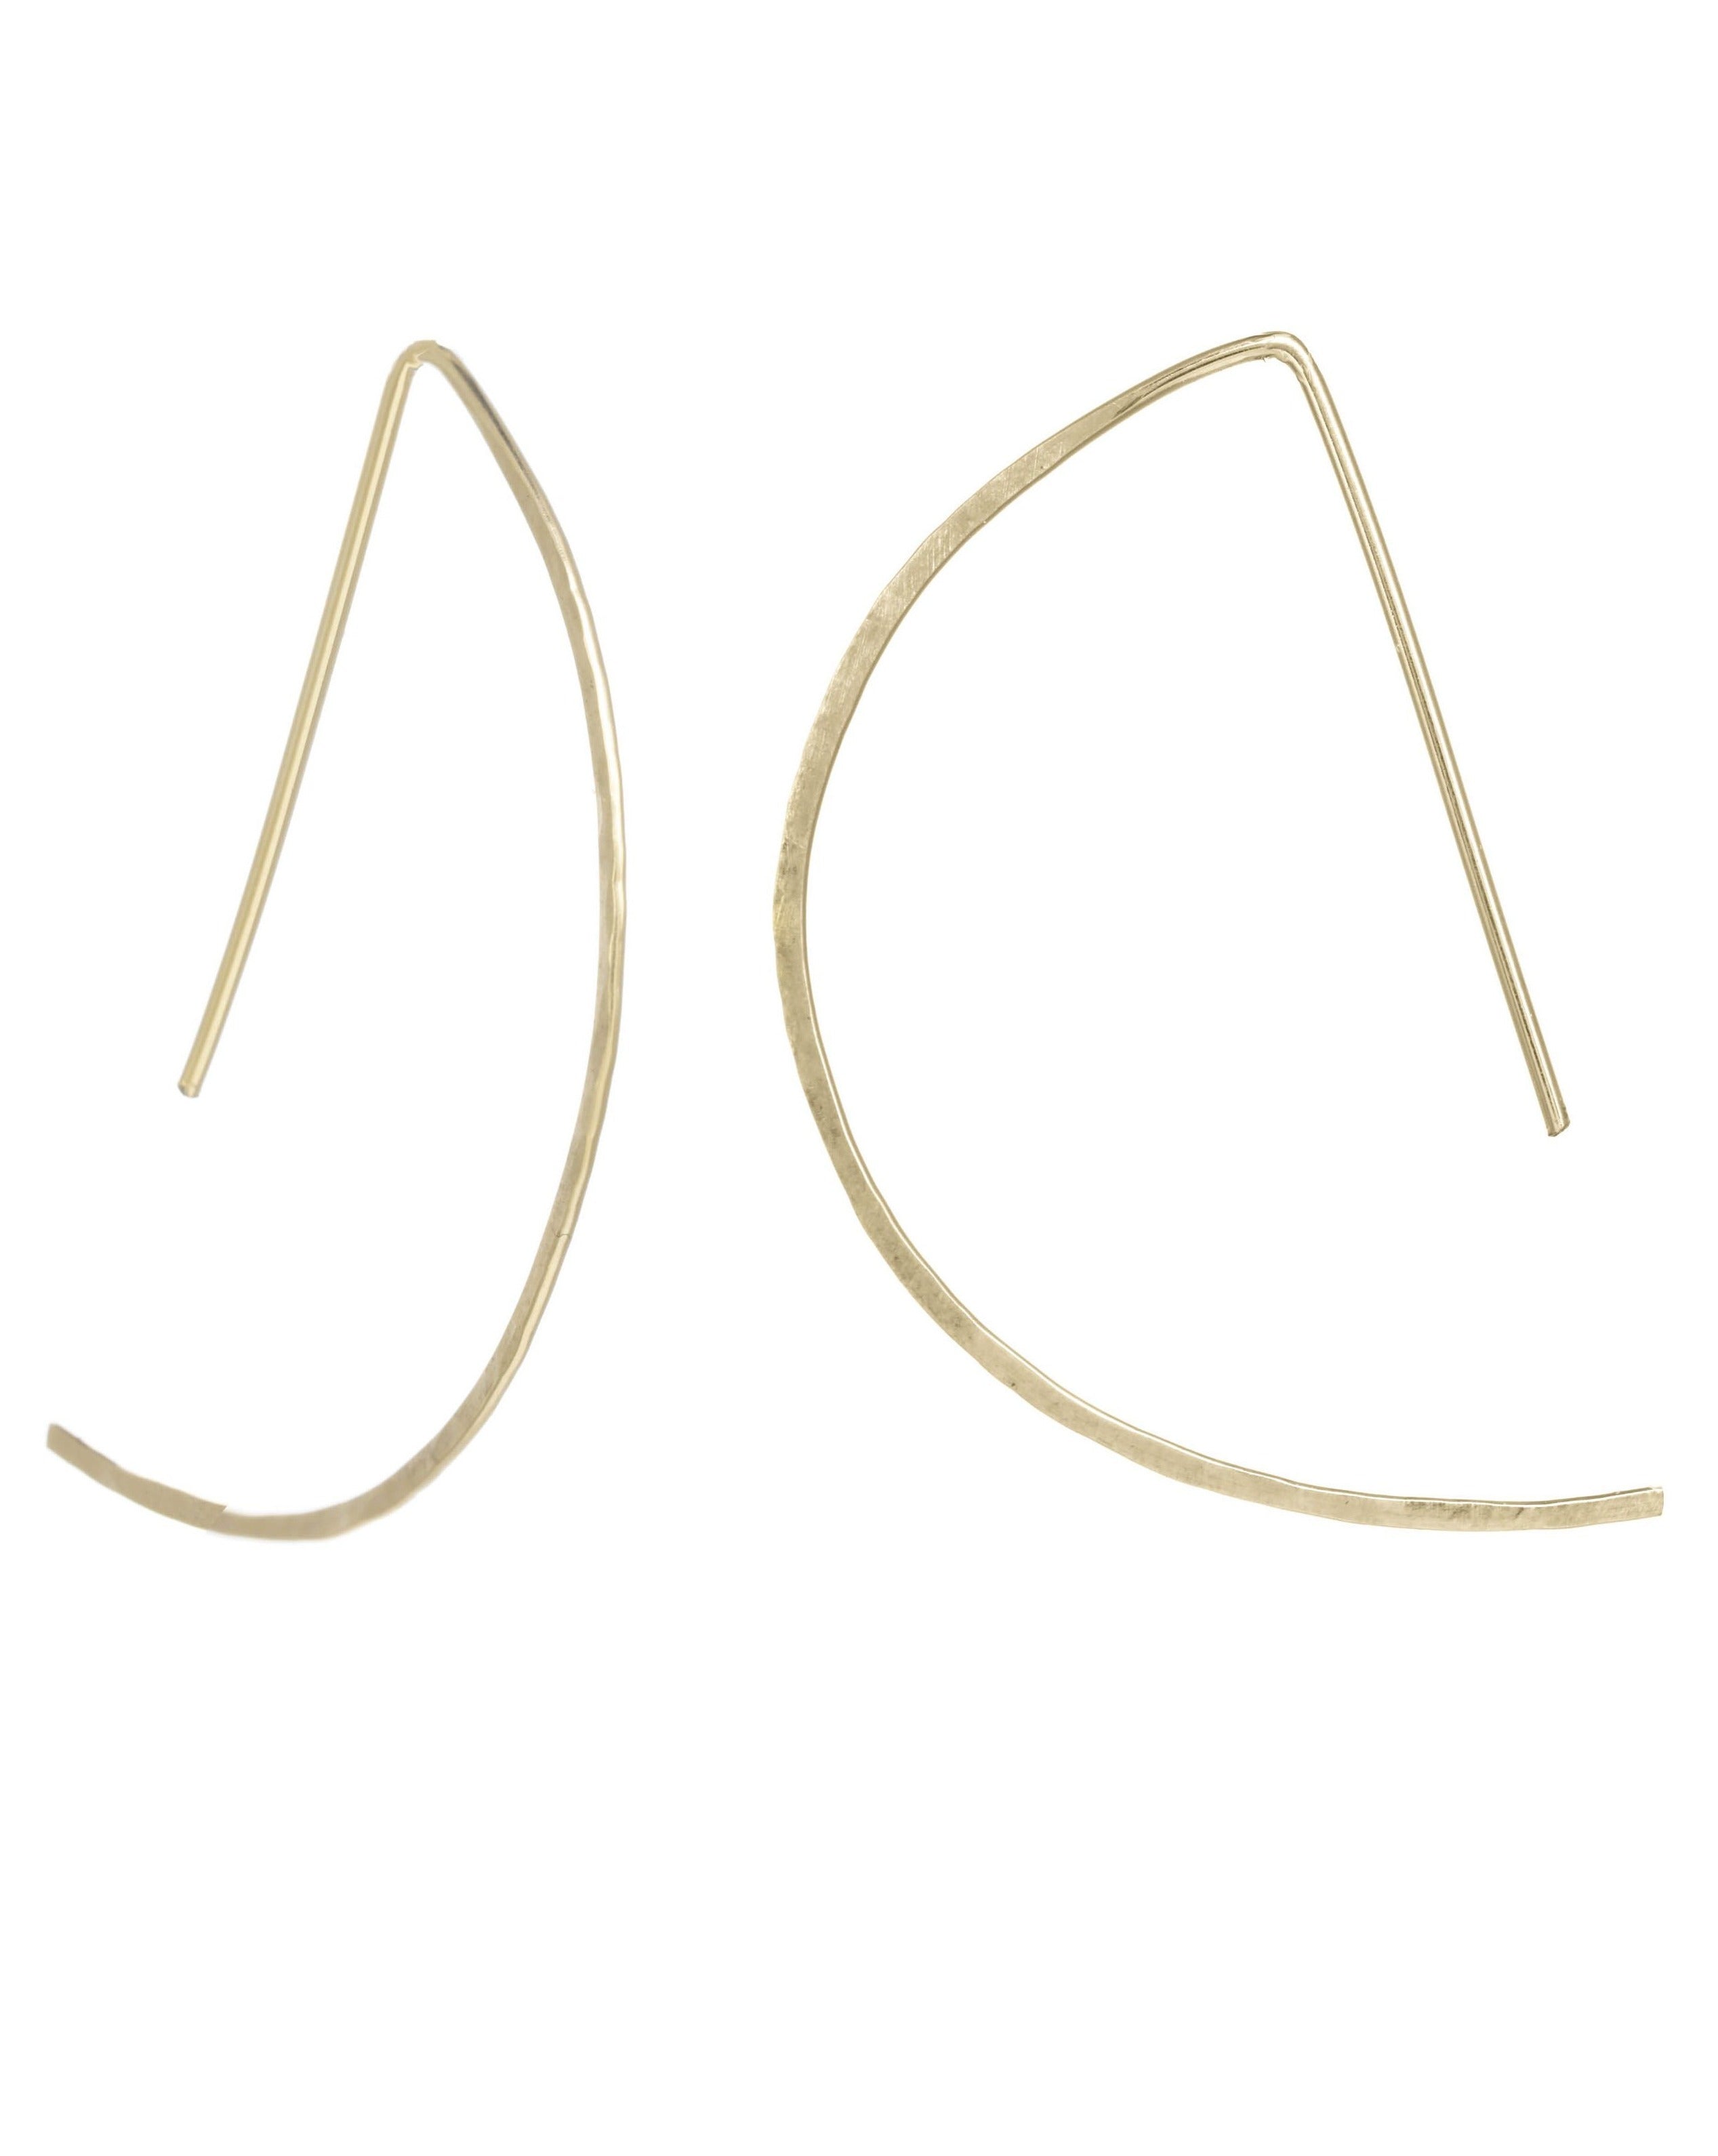 D Earrings Small by KOZAKH. D shape hammered wire earrings, crafted in 14K Gold Filled.